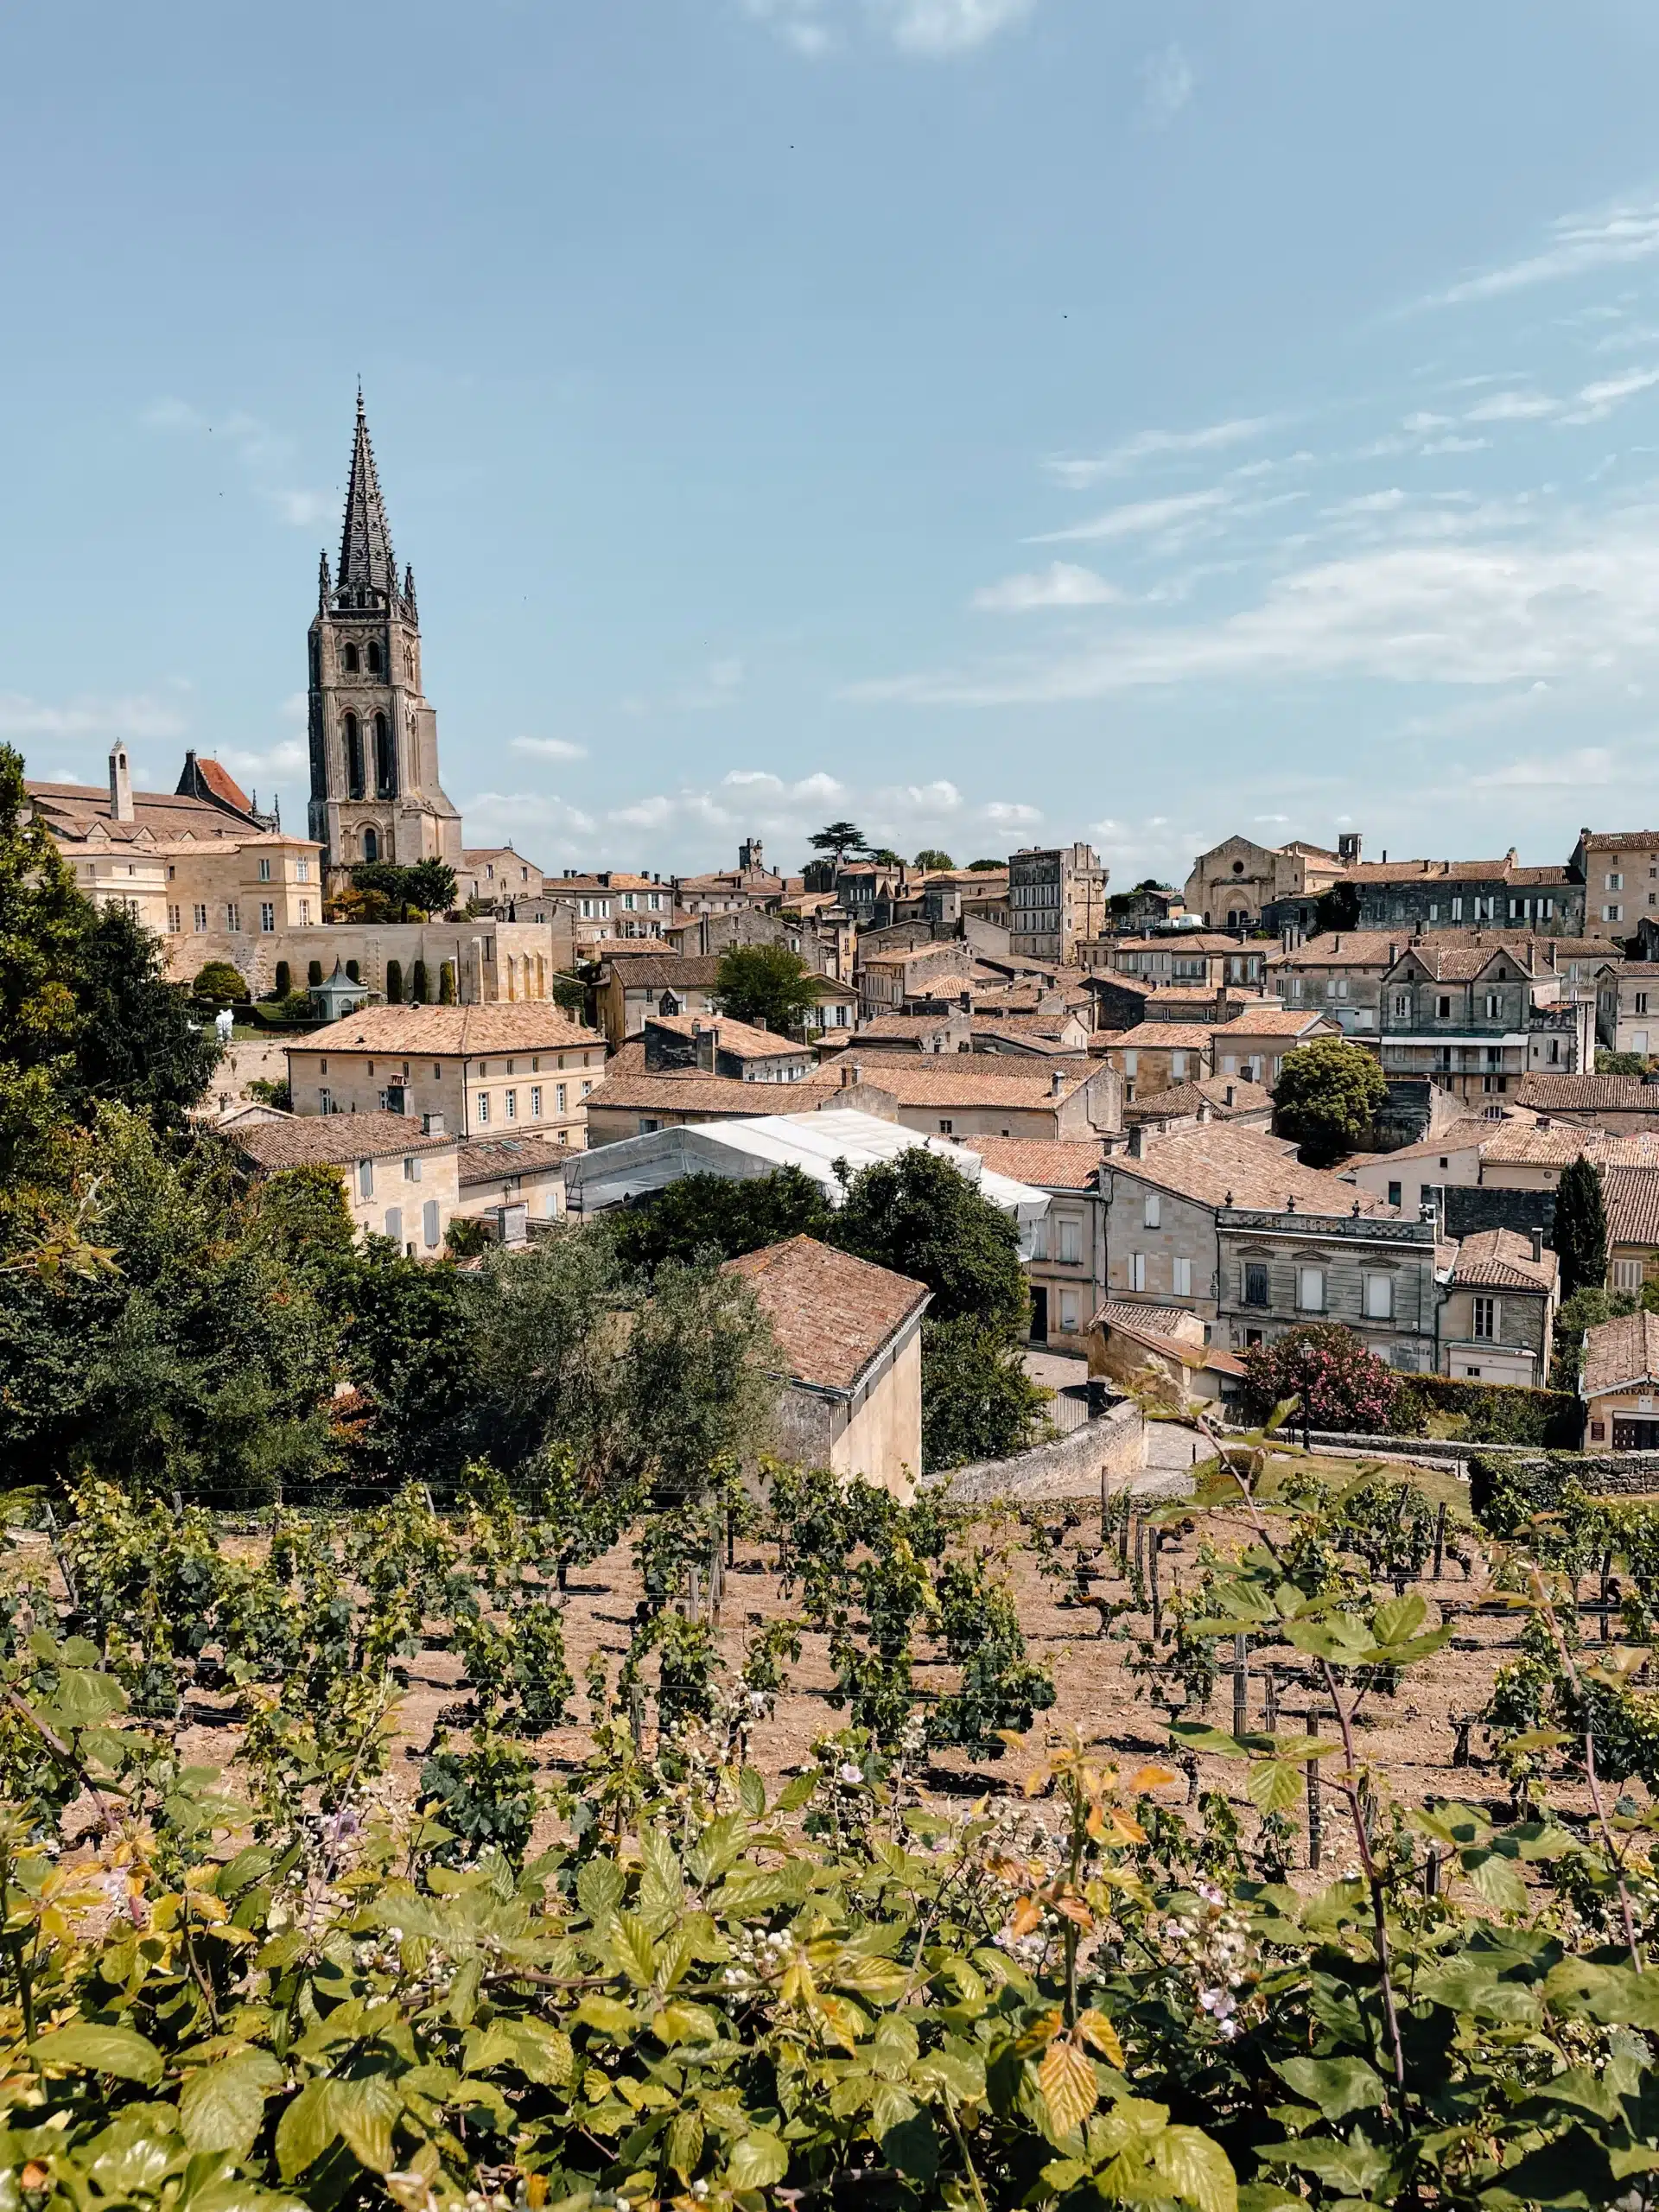 View overlooking the medieval town of St. Emilion with vineyards in the foreground and the town sitting in the background